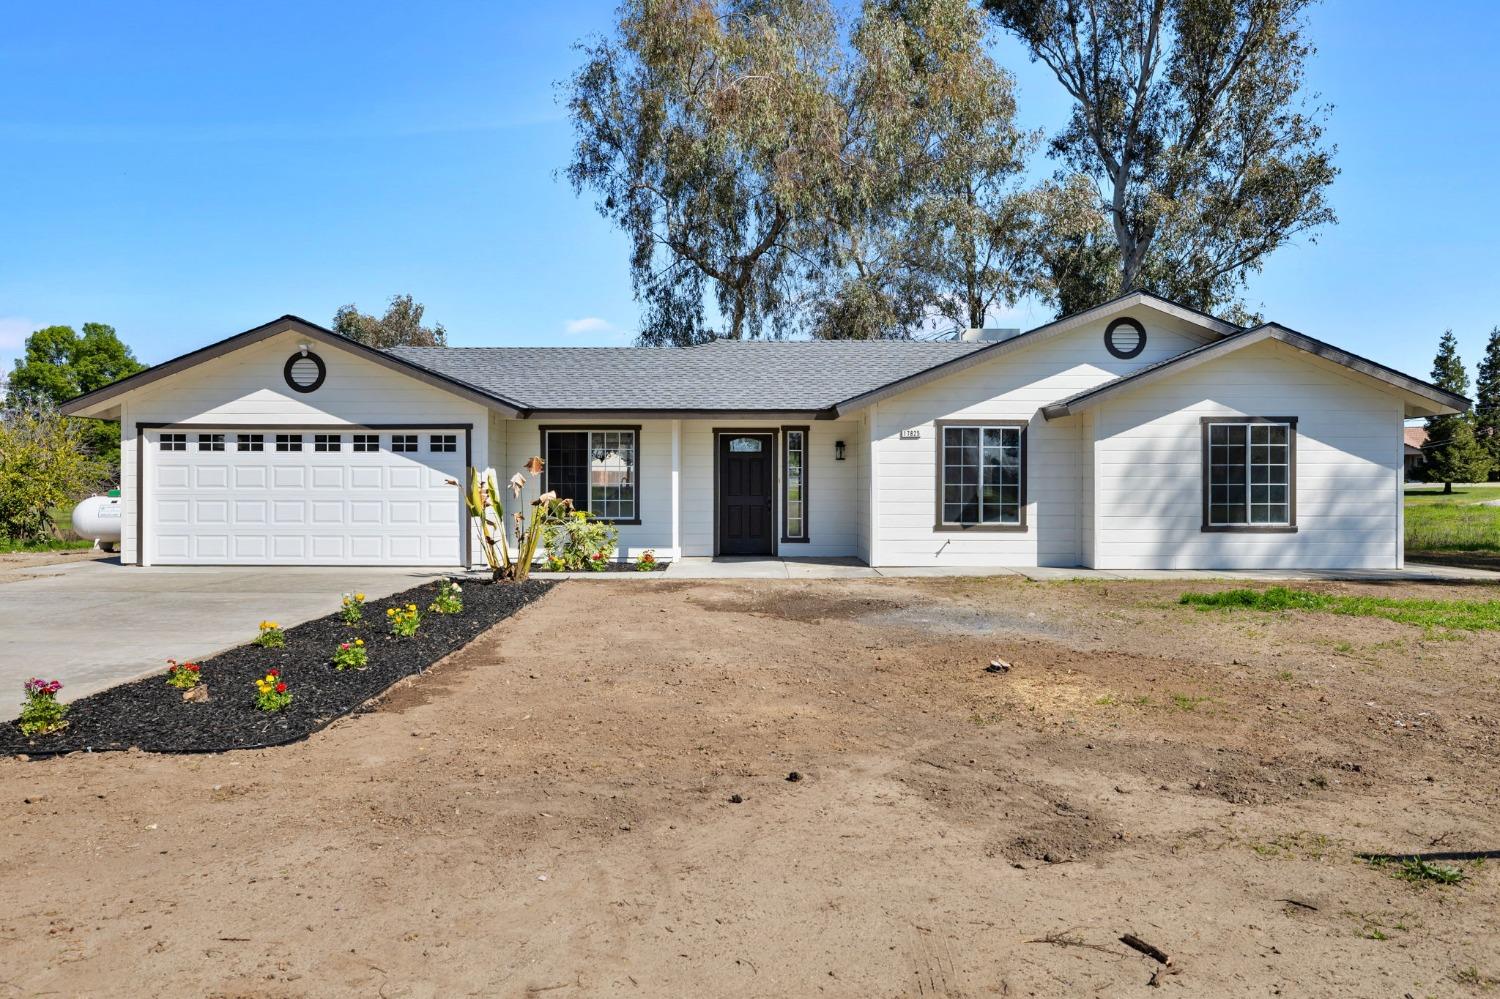 Photo of 17825 Short Rd in Madera, CA